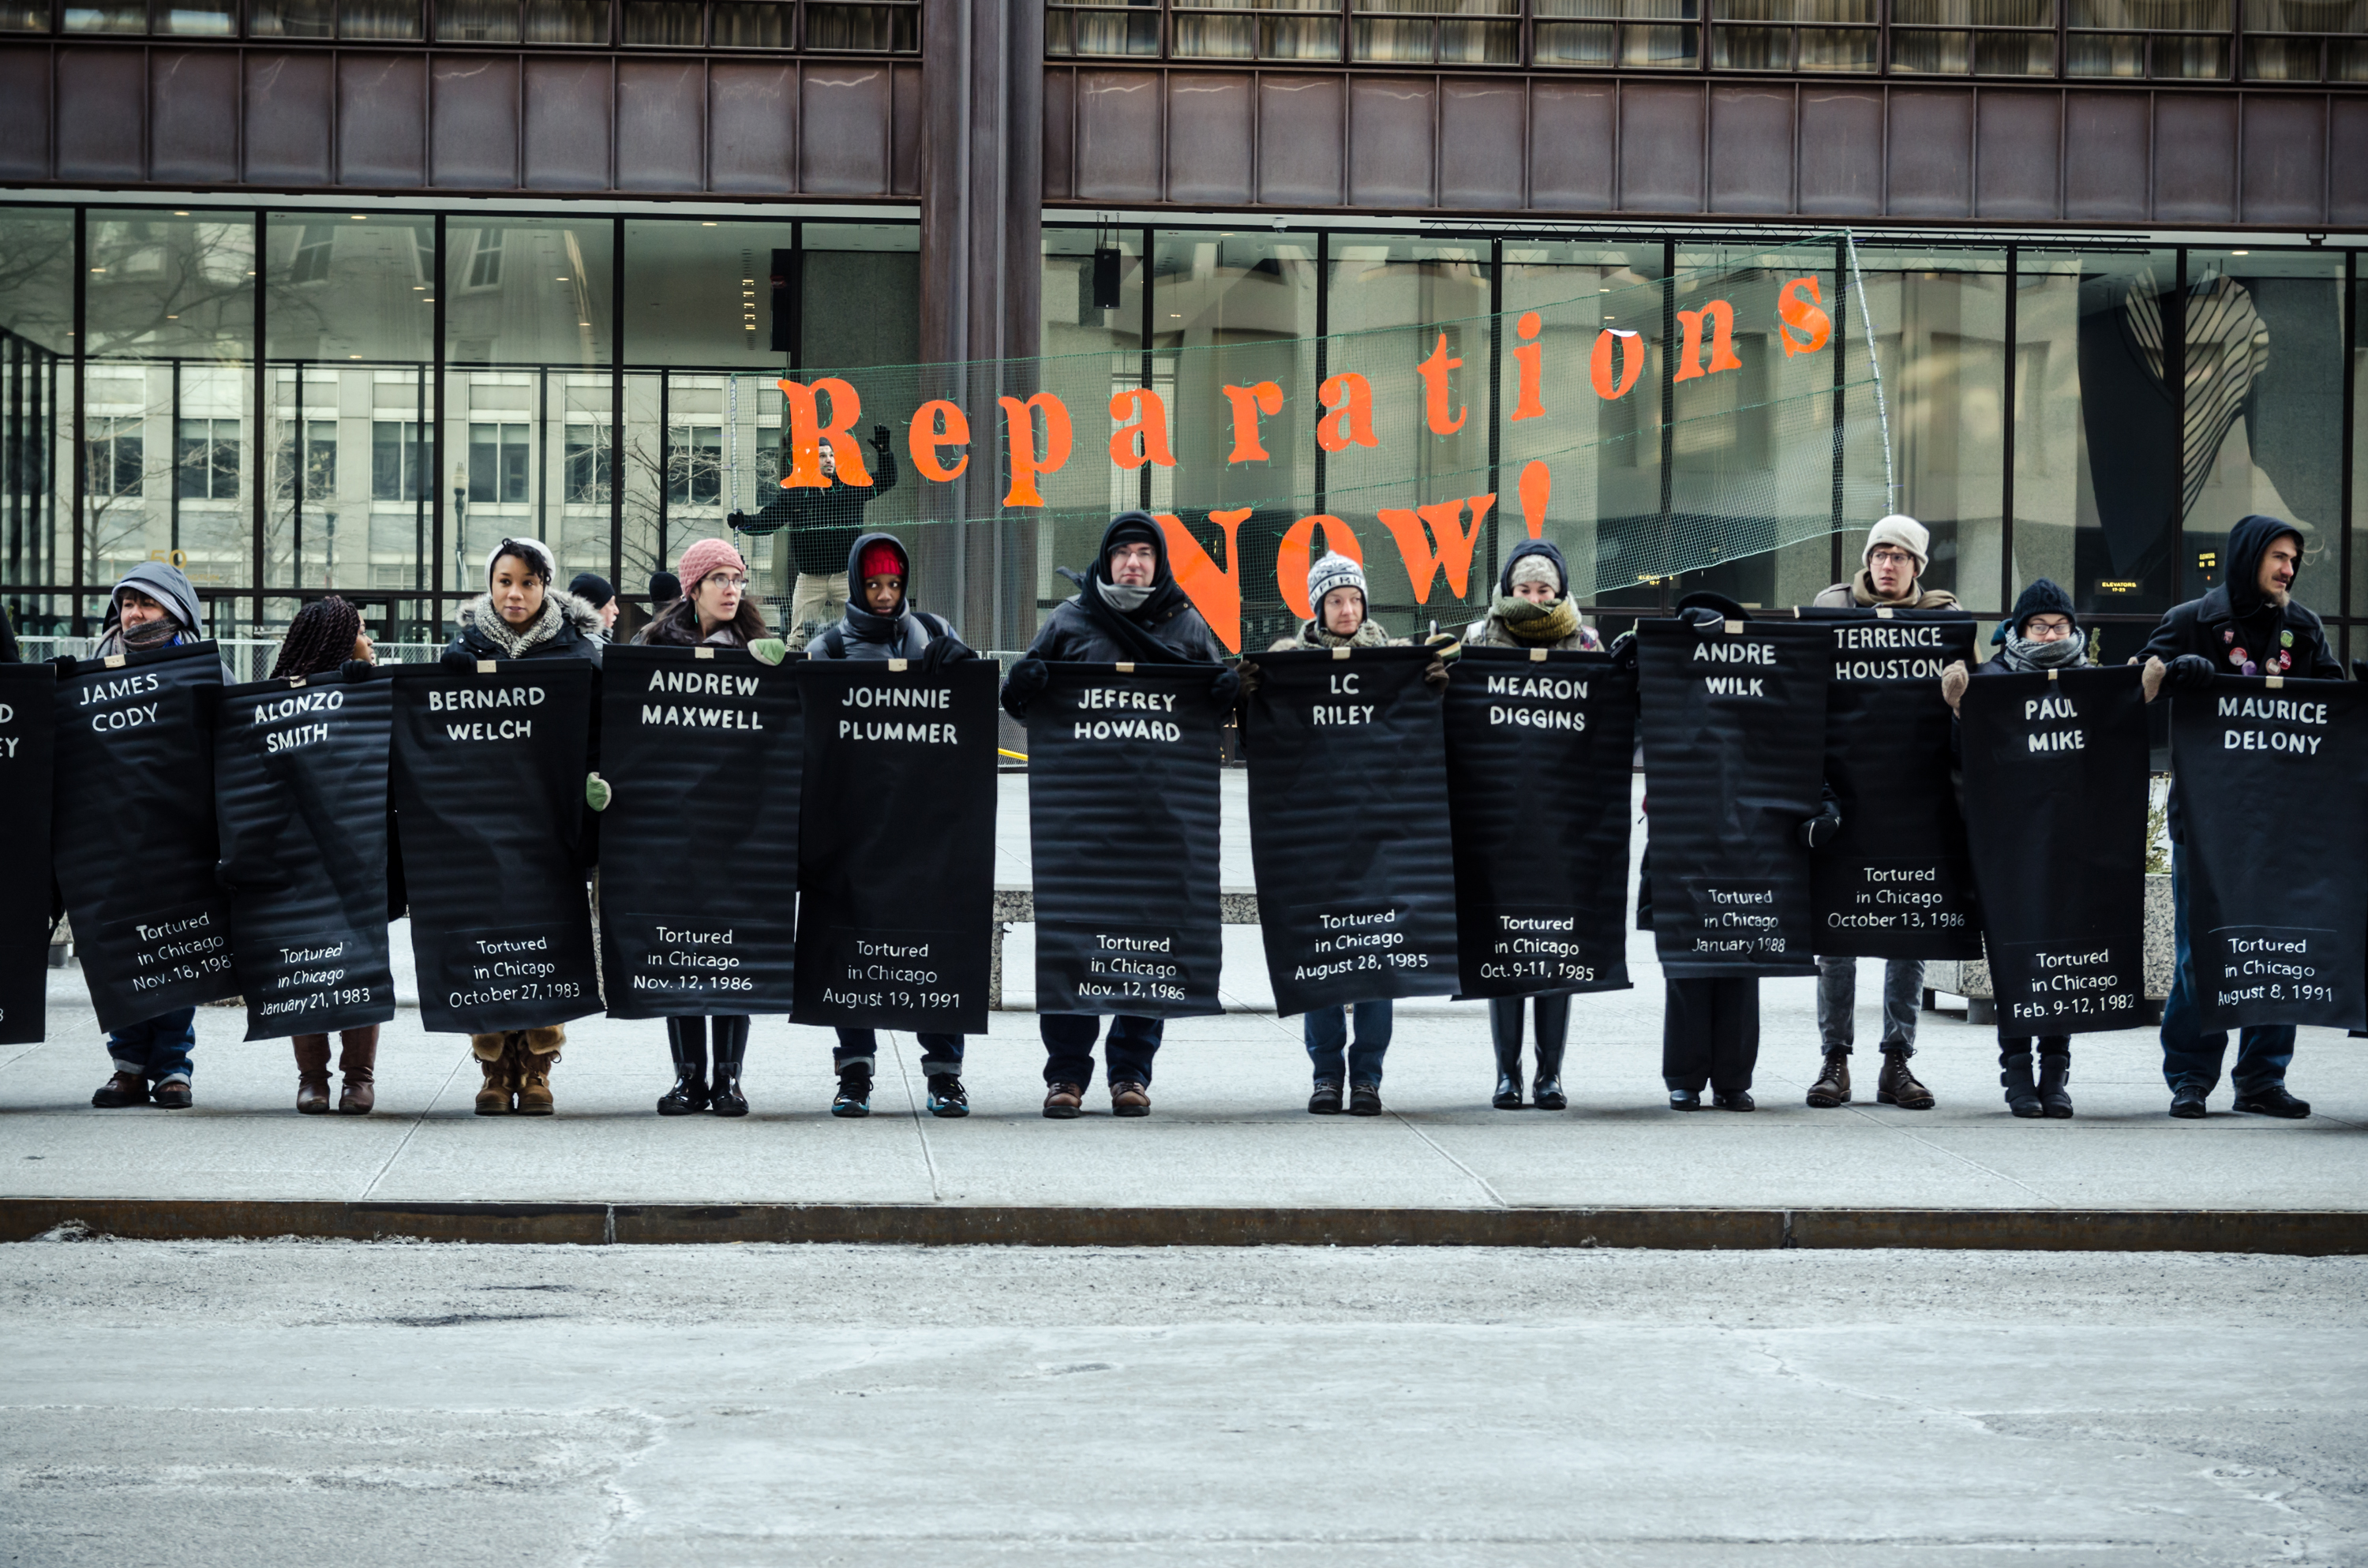 Image: People lined up facing the camera. They are holding up Black posters with the names of victims of torture by Chicago Police inscribed in white. Behind them is a transparent banner with the words “Reparations NOW!” inscribed in orange. Photo taken February 2015 at the Rally for Reparations organized by The Chicago Torture-Justice Memorials, Project NIA, Amnesty International USA, and We Charge Genocide. Photo courtesy of the artist.